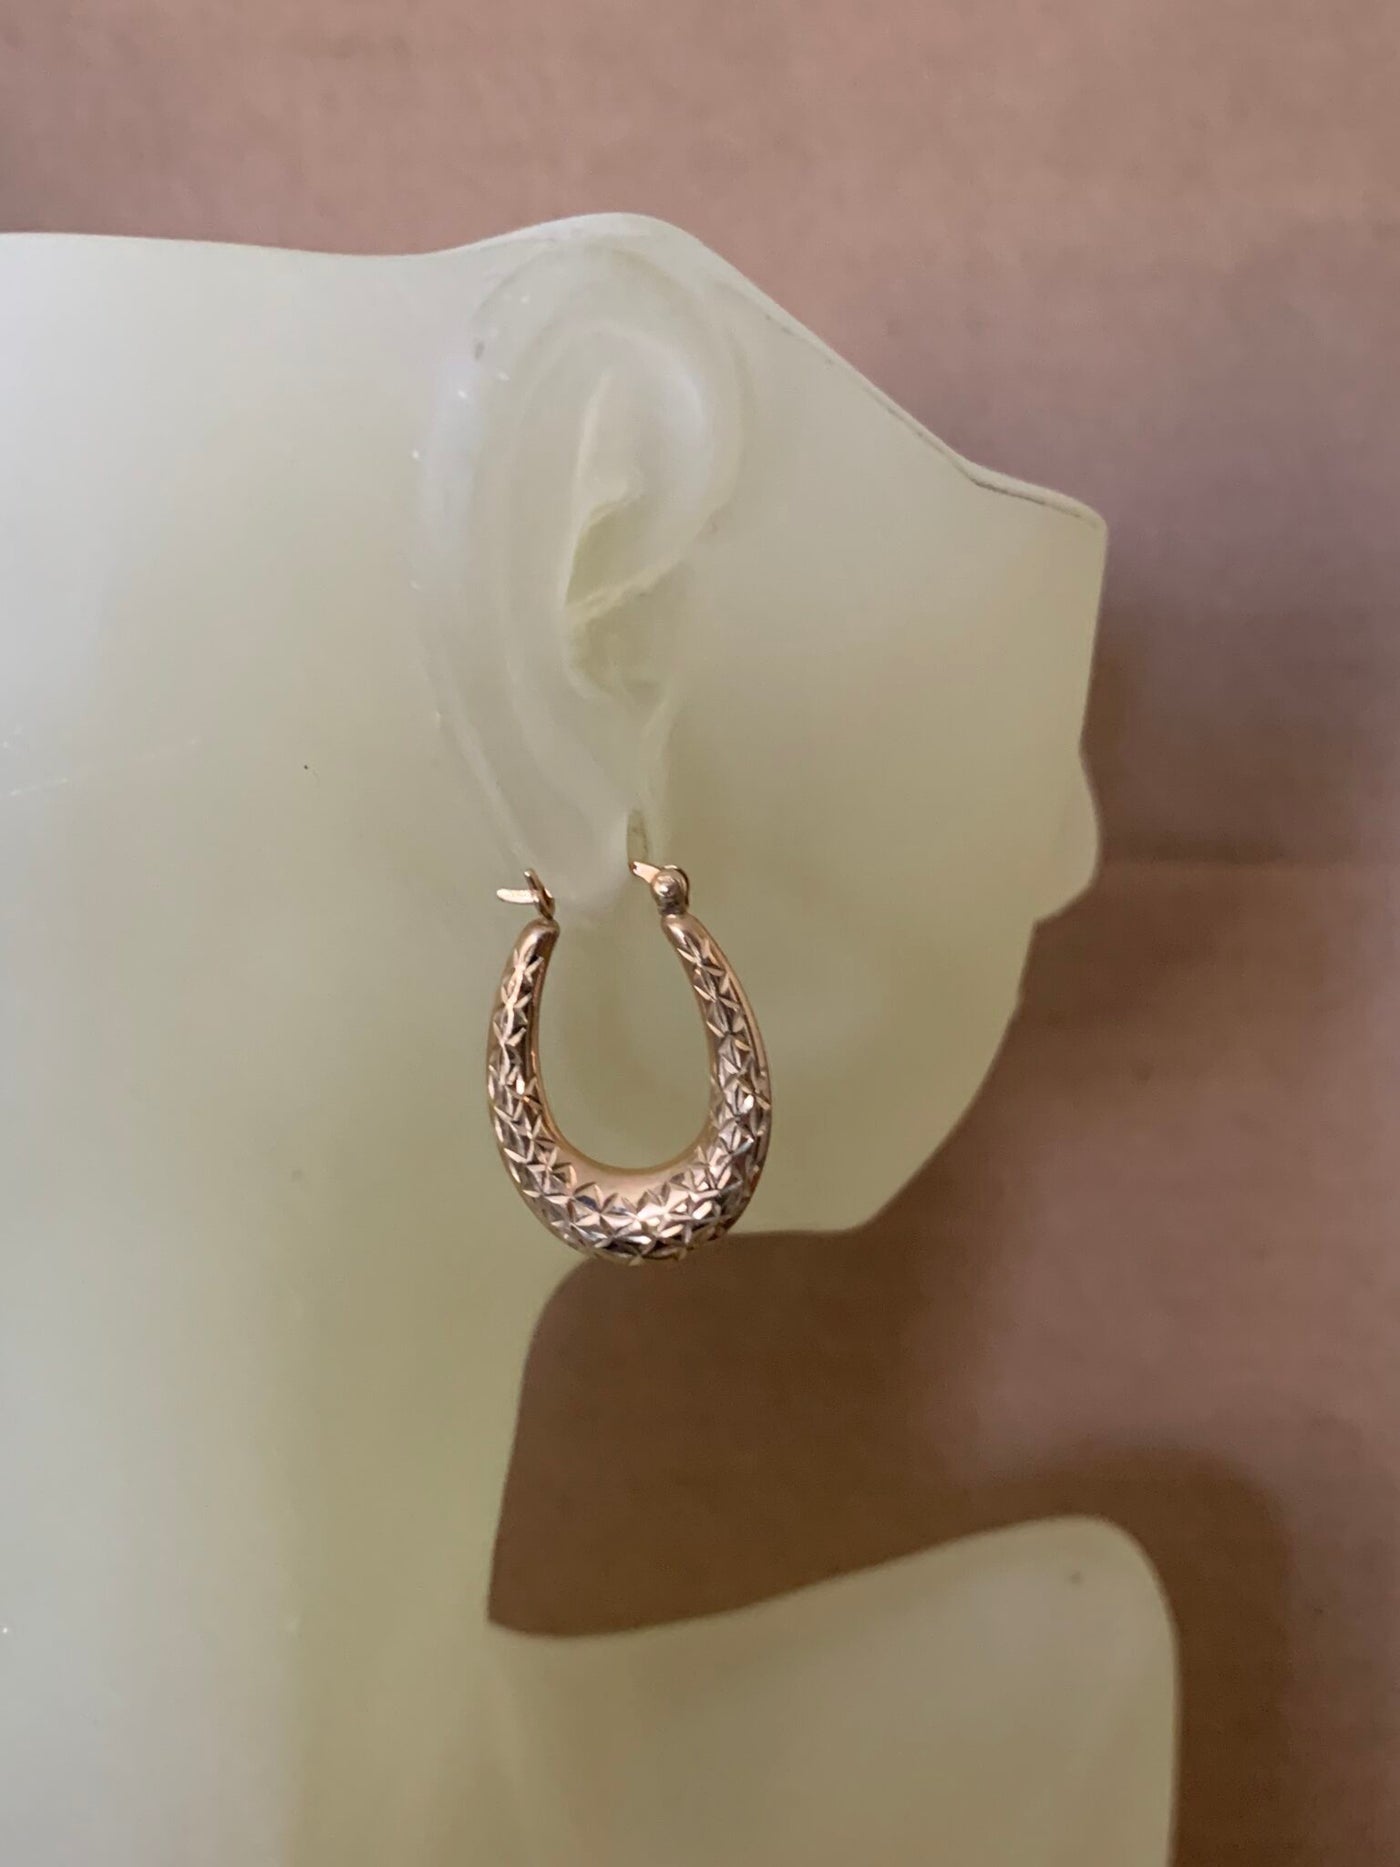 Solid 14K Yellow Gold Oval Hoop Earrings with Diamond Cut Design